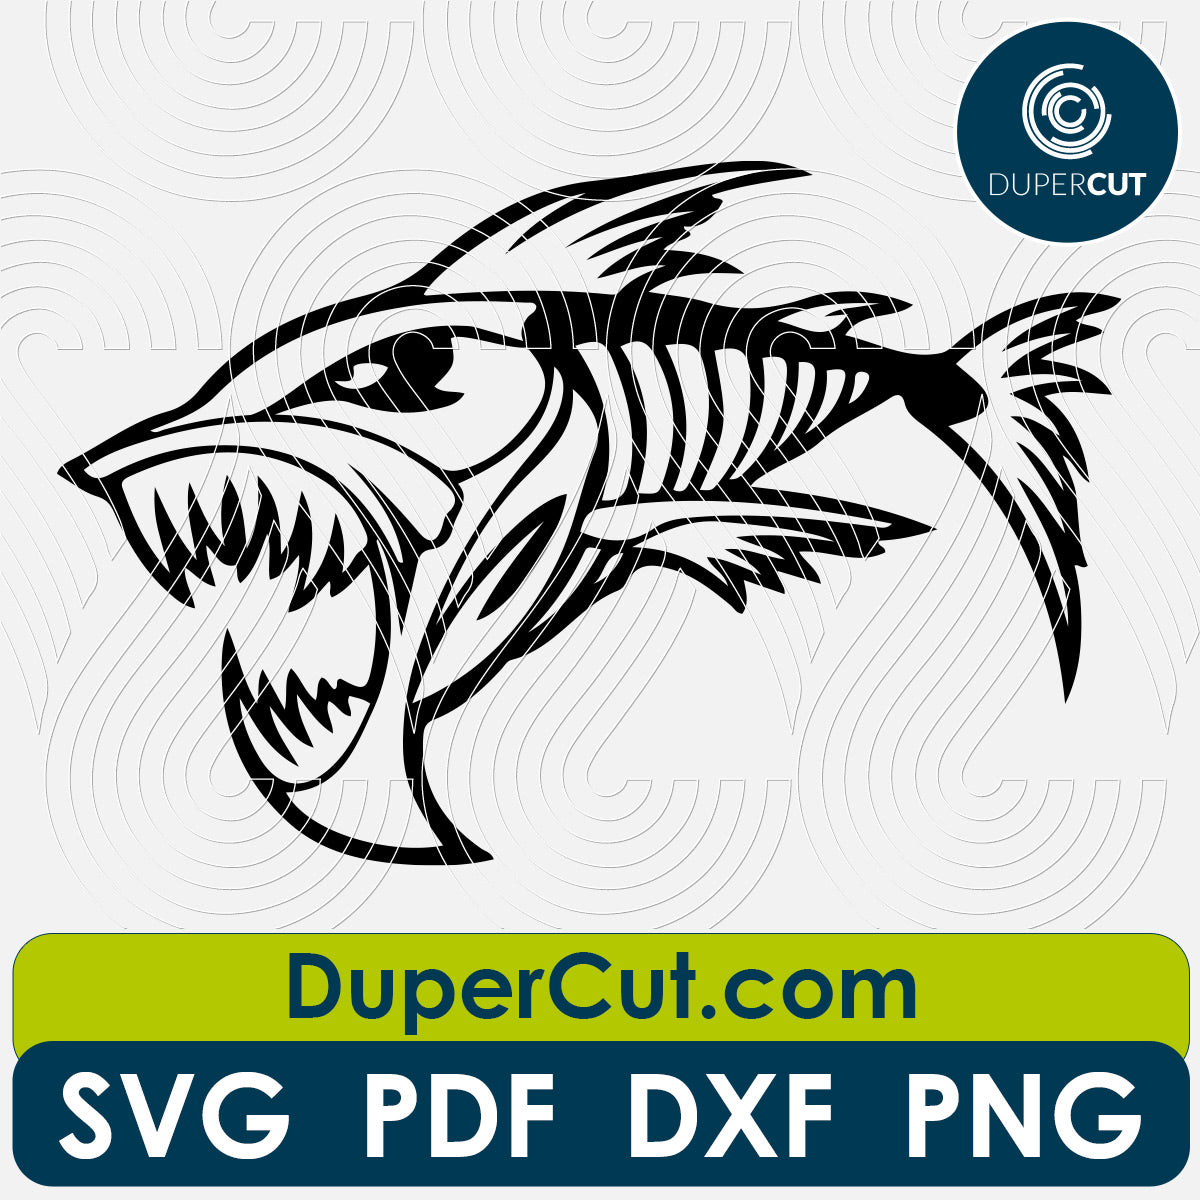 Angry shark side view steampunk vector - SVG DXF PNG files - cutting files template for Cricut, Glowforge, Silhouette Cameo, CNC plasma machines by DuperCut.com